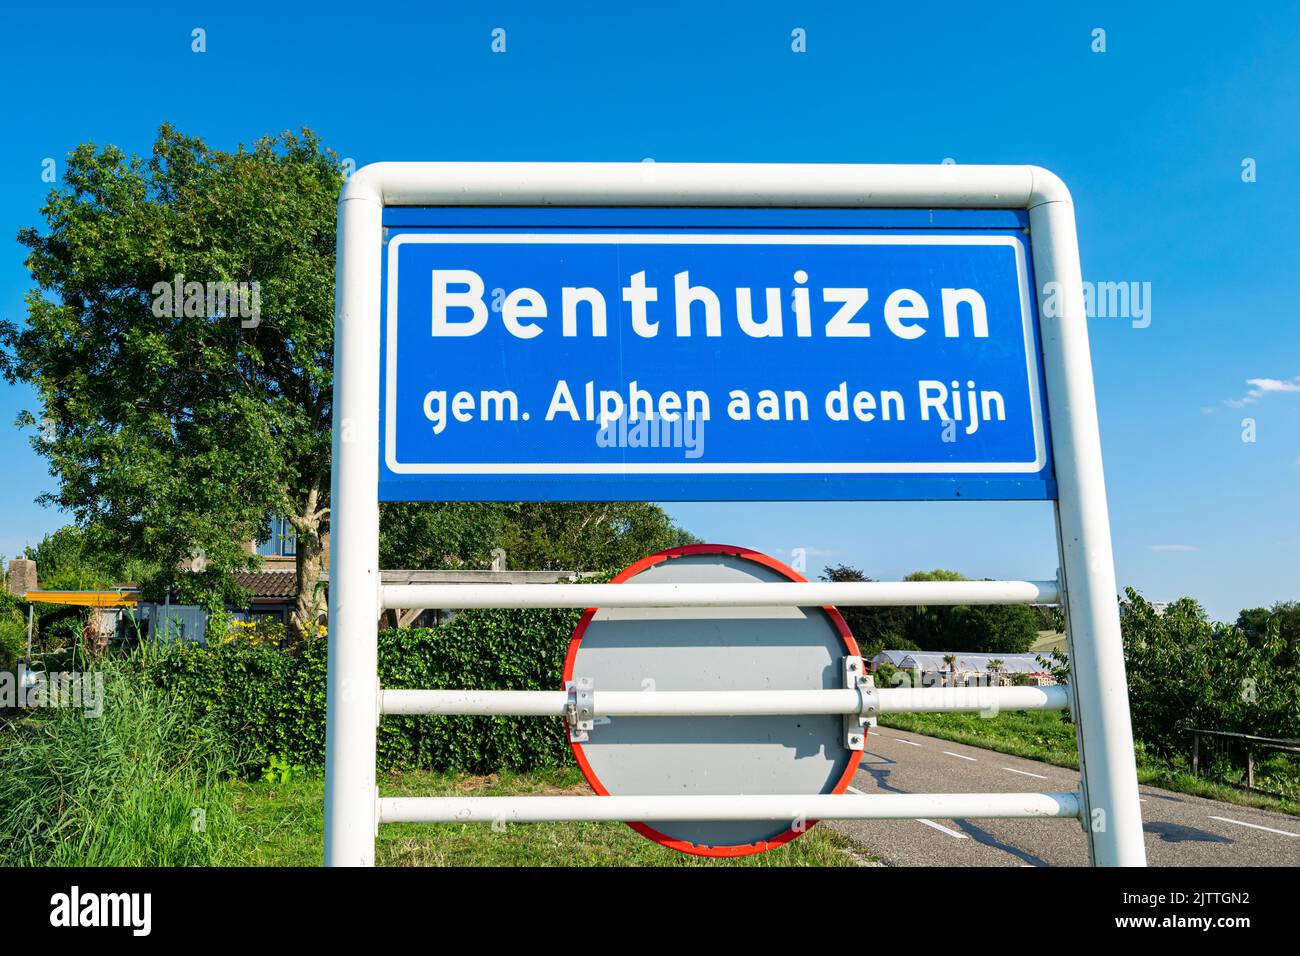 Place name sign of the village of Benthuizen, municipality of Alphen aan den Rijn in The Netherlands. Stock Photo